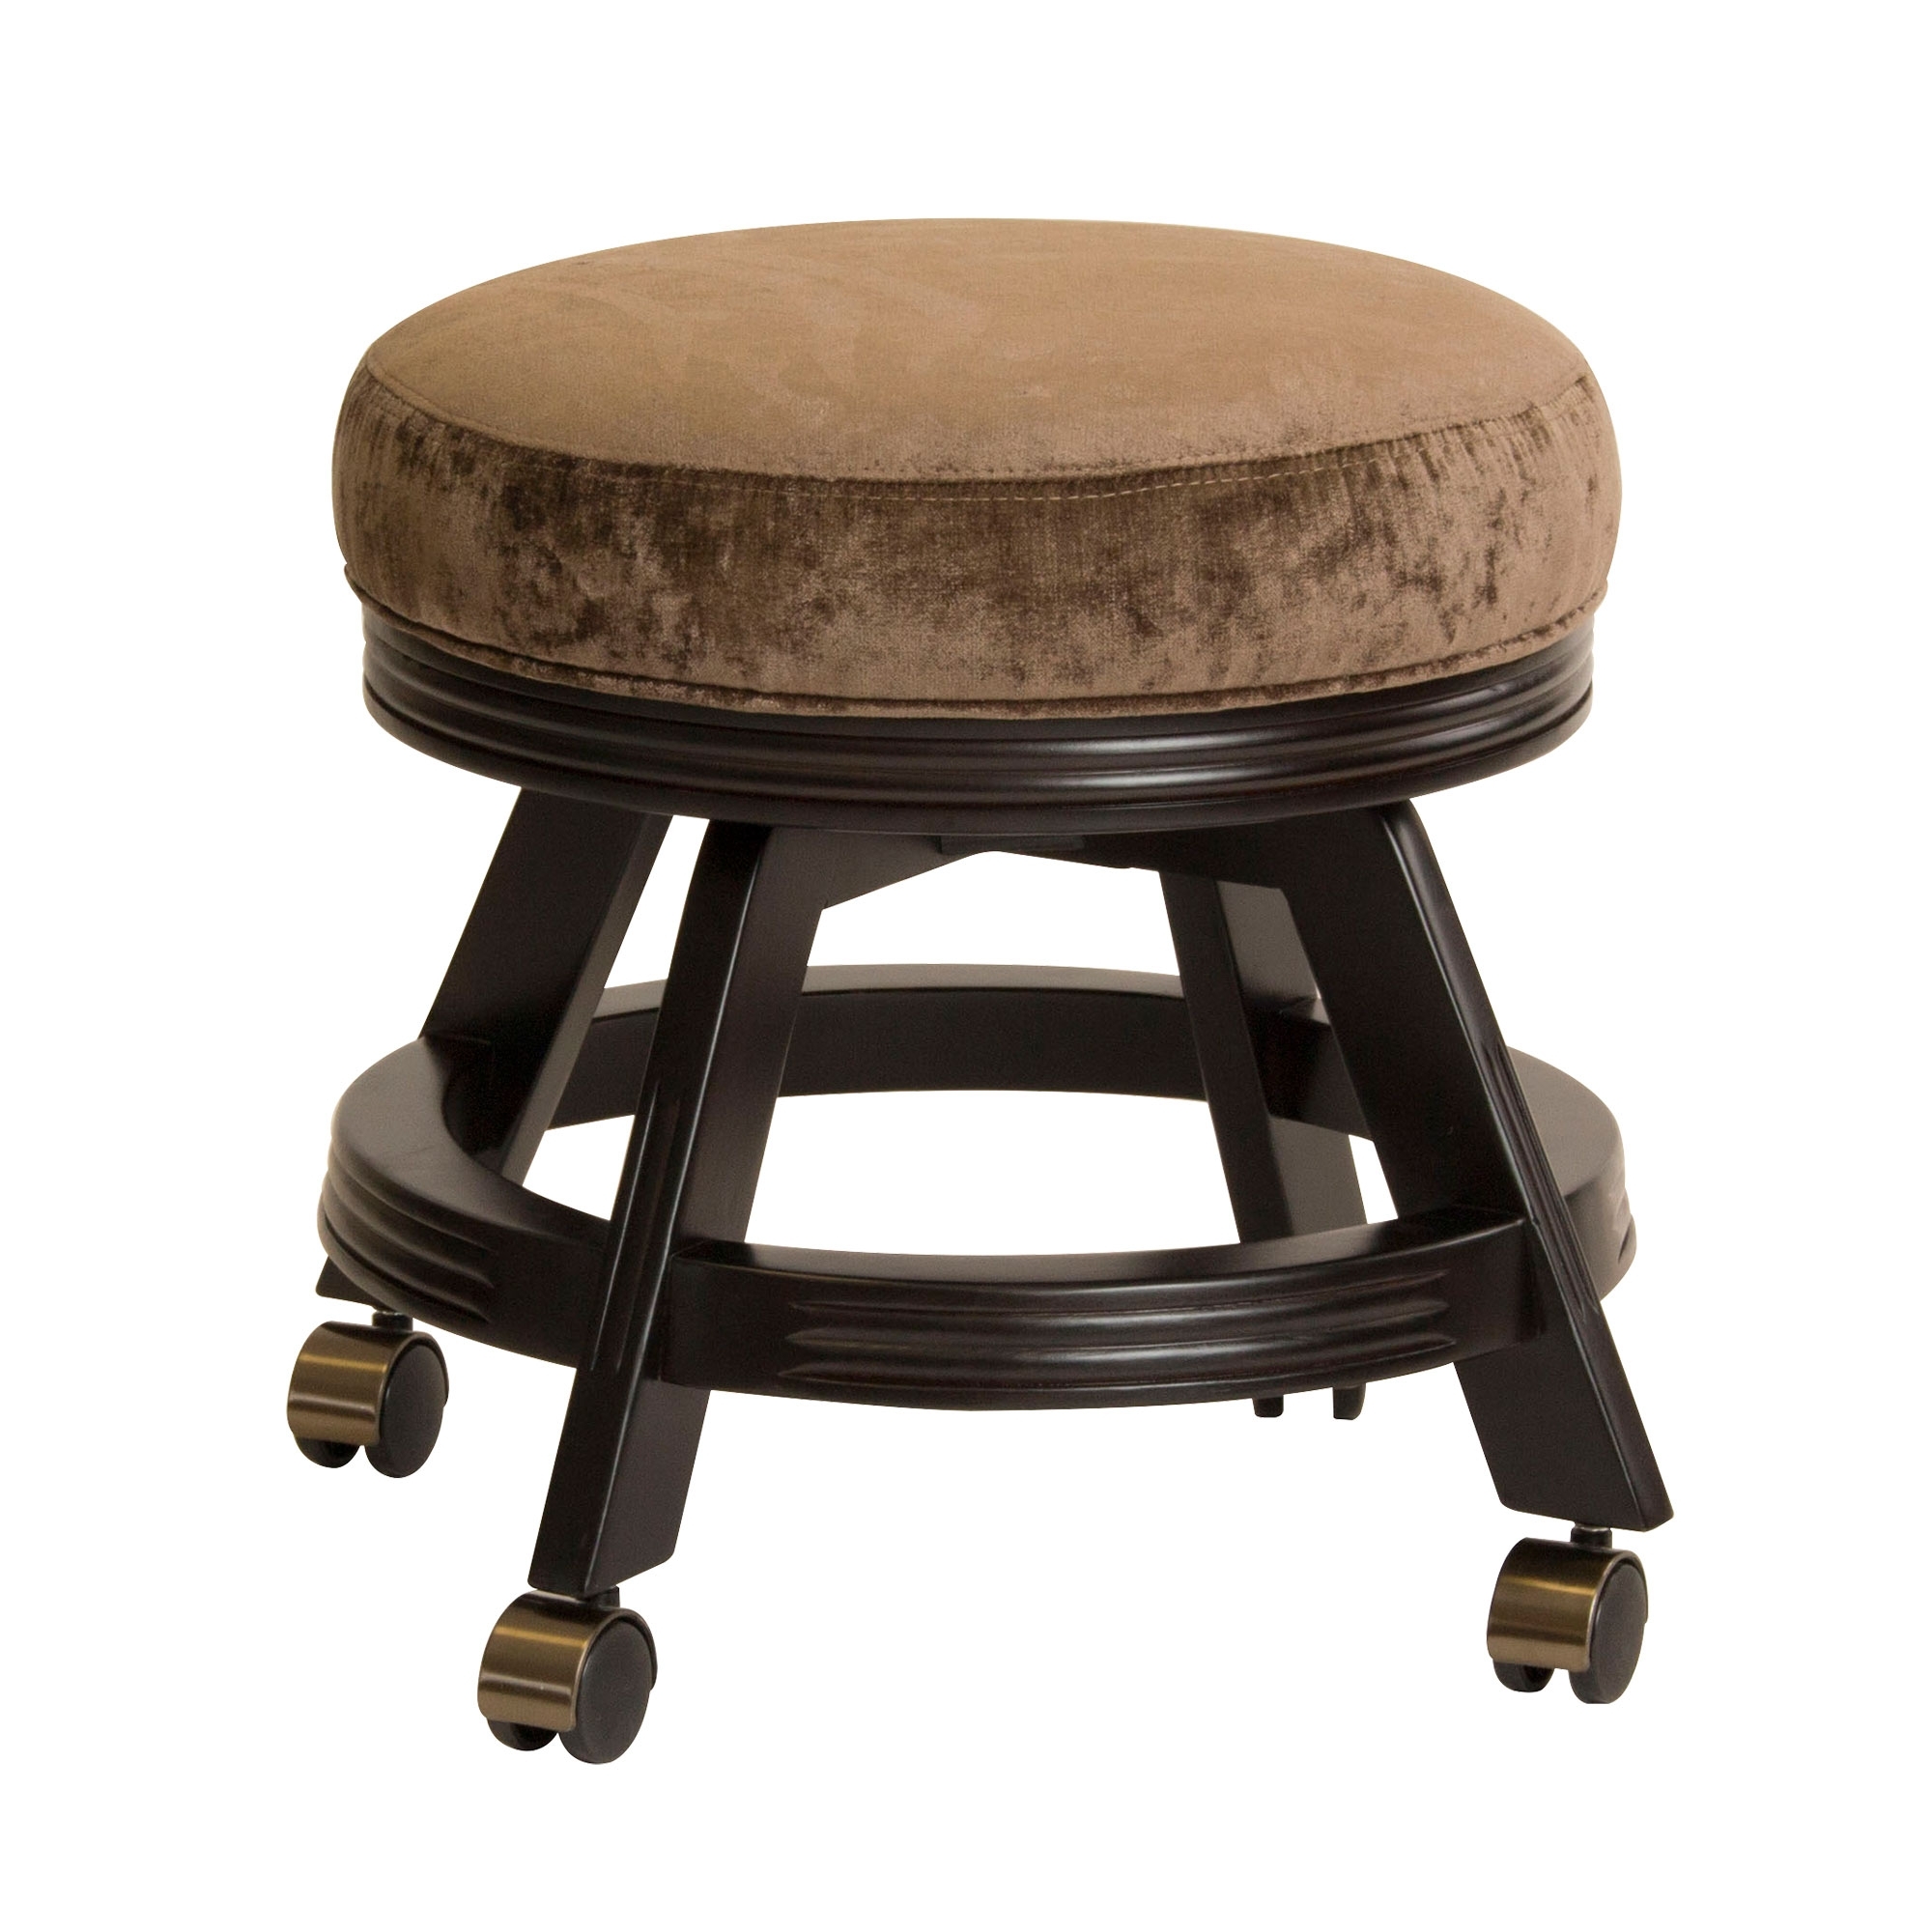 Low Stool With Wheels